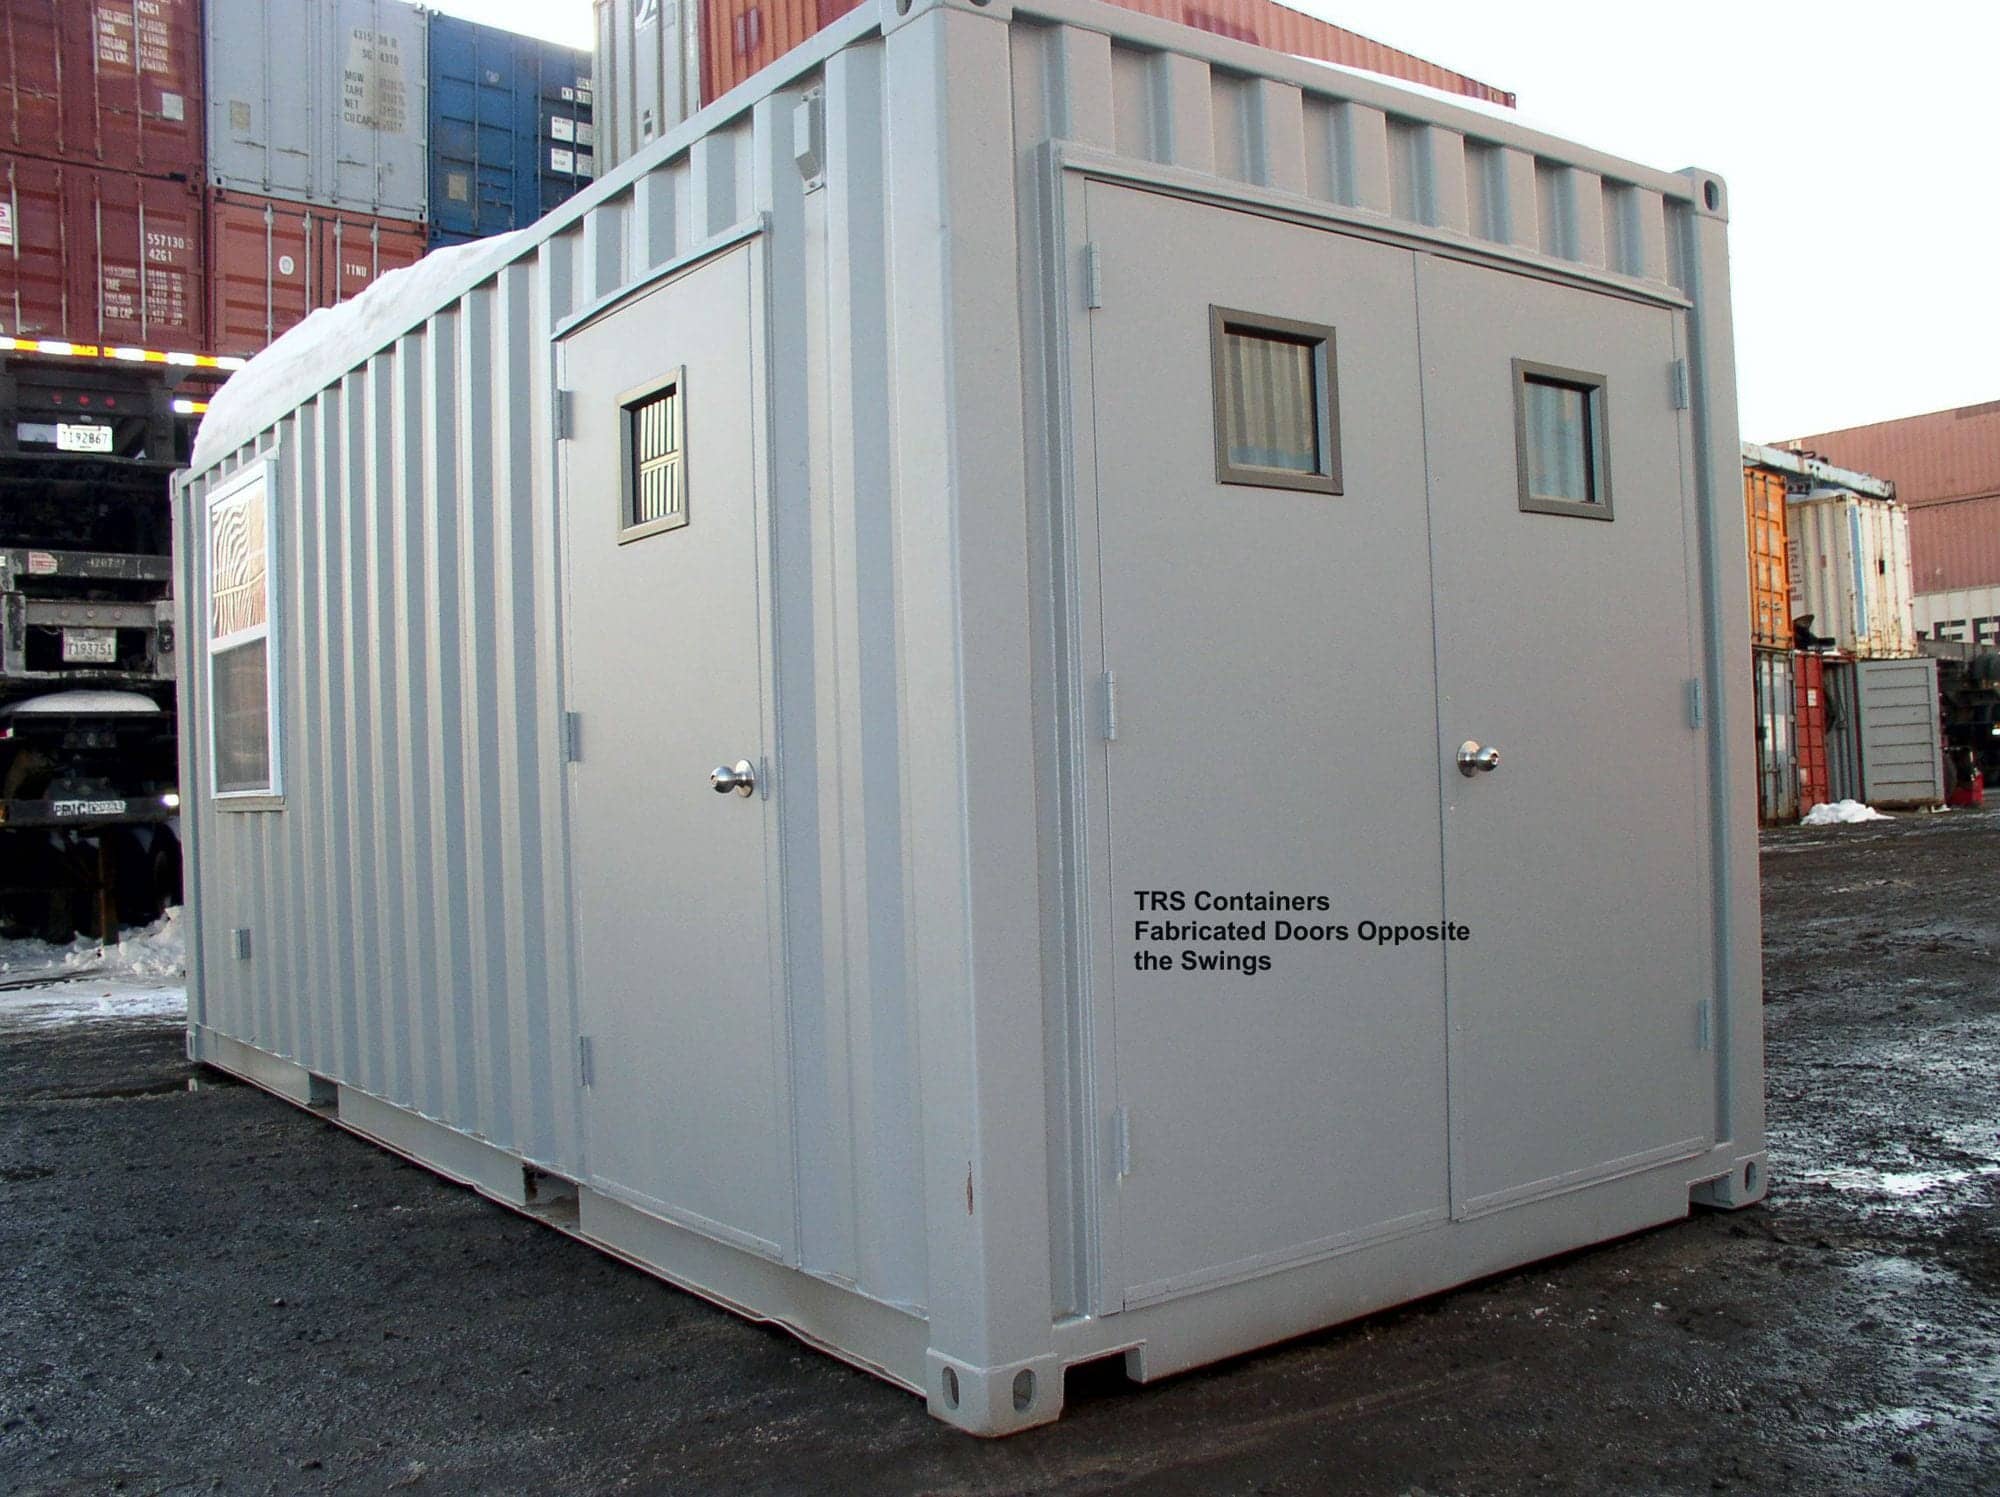 TRS Containers sells and modifies steel ISO cargo containers with additional doors